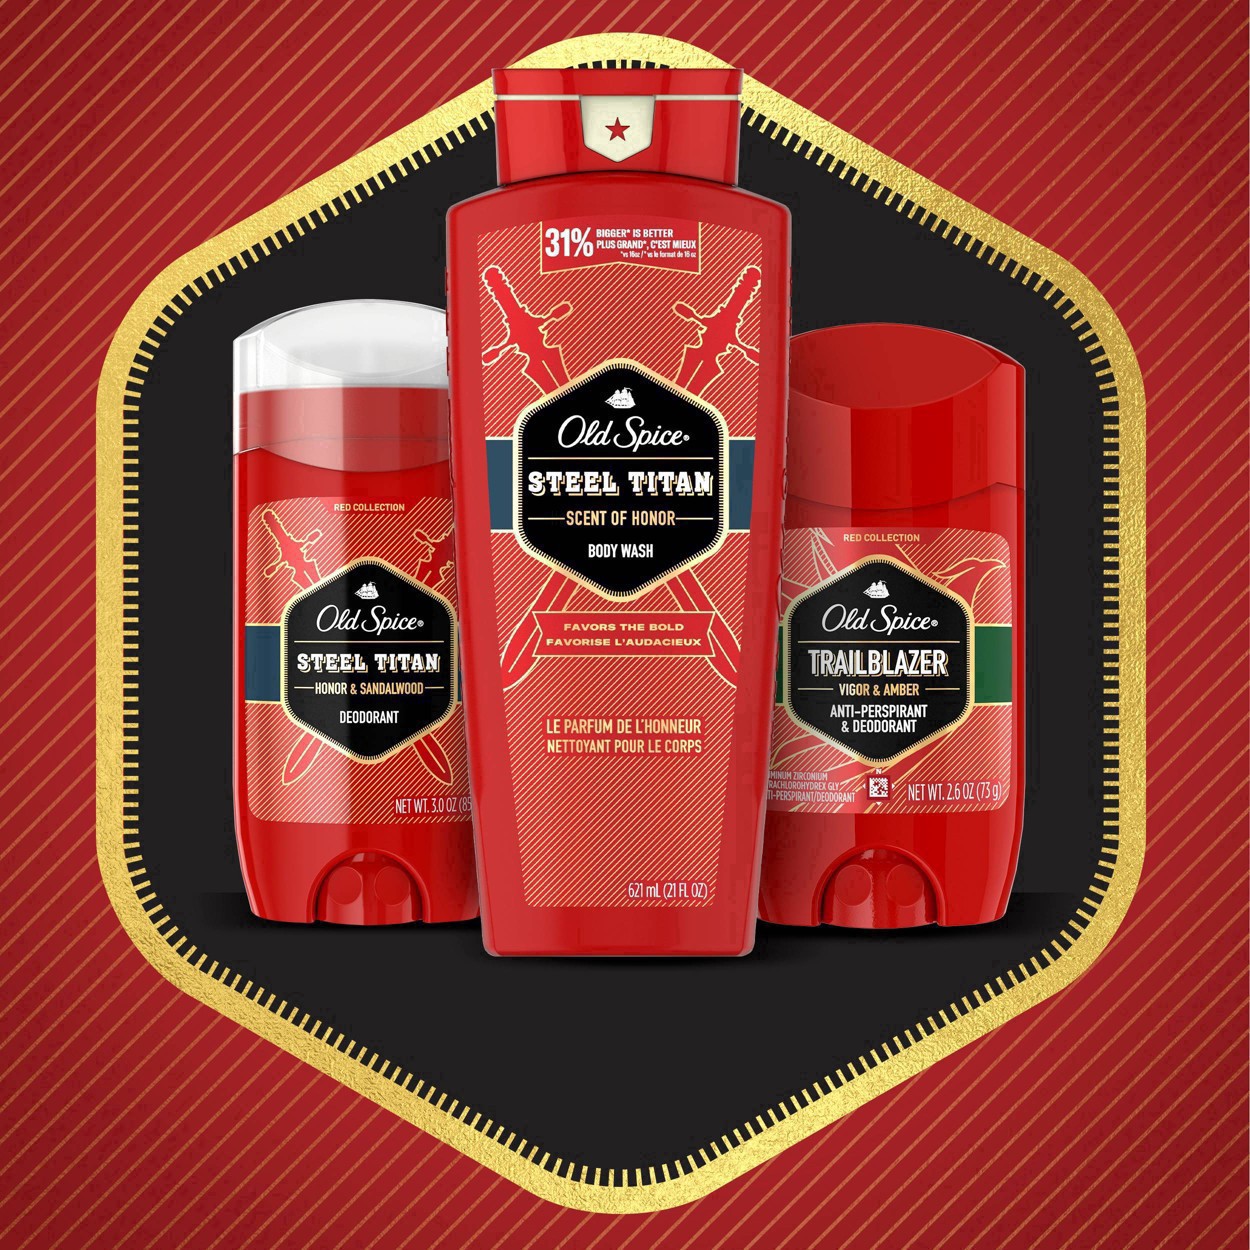 slide 15 of 95, Old Spice Red Collection Swagger Scent Deodorant for Men, Value Pack, 3.0 oz, Pack of 2, 2 ct; 3 oz